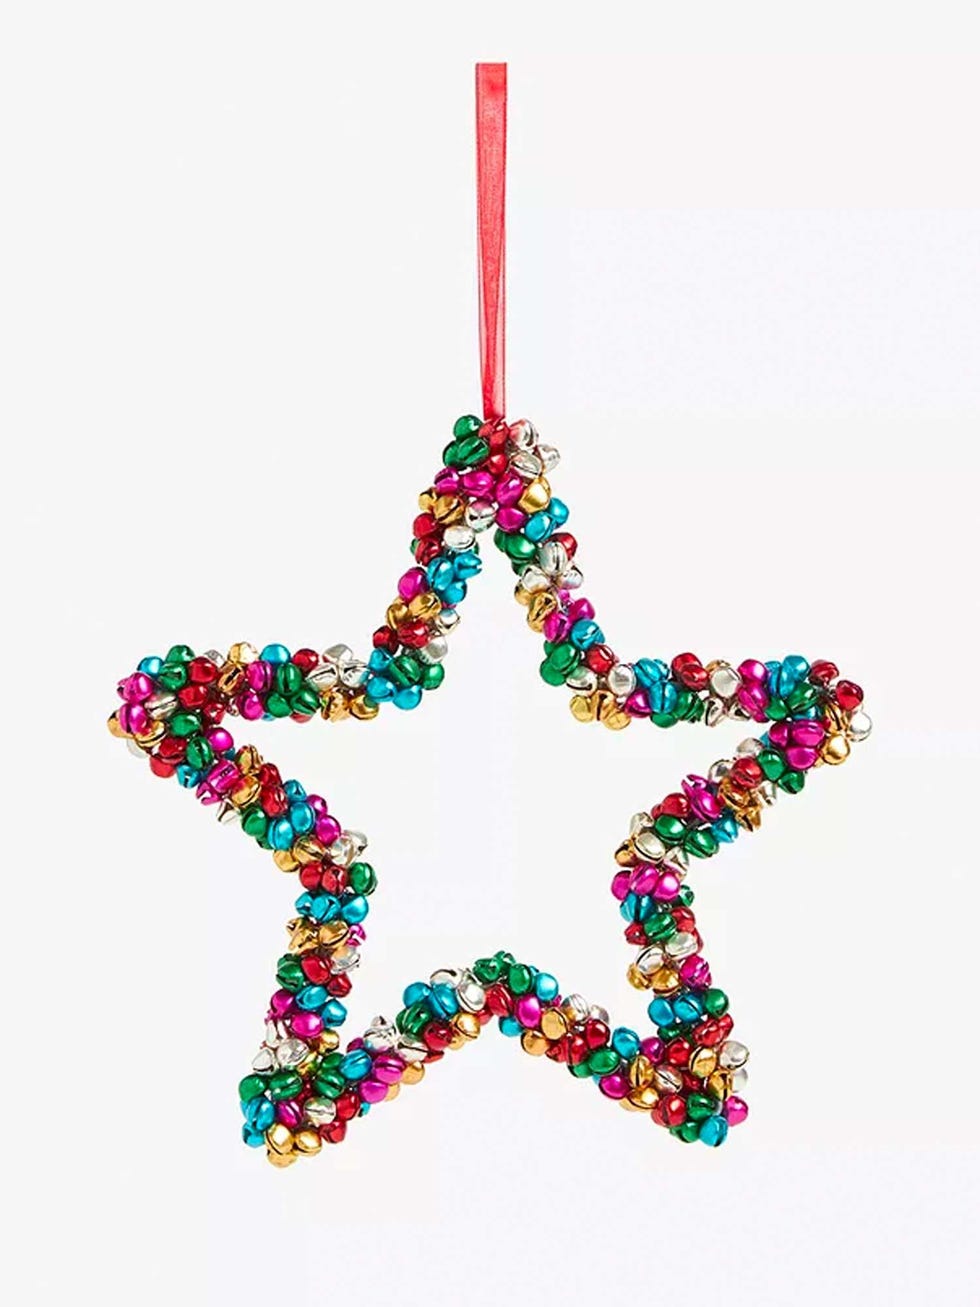 Rainbow Time Capsule Bell Star Hanging Decoration